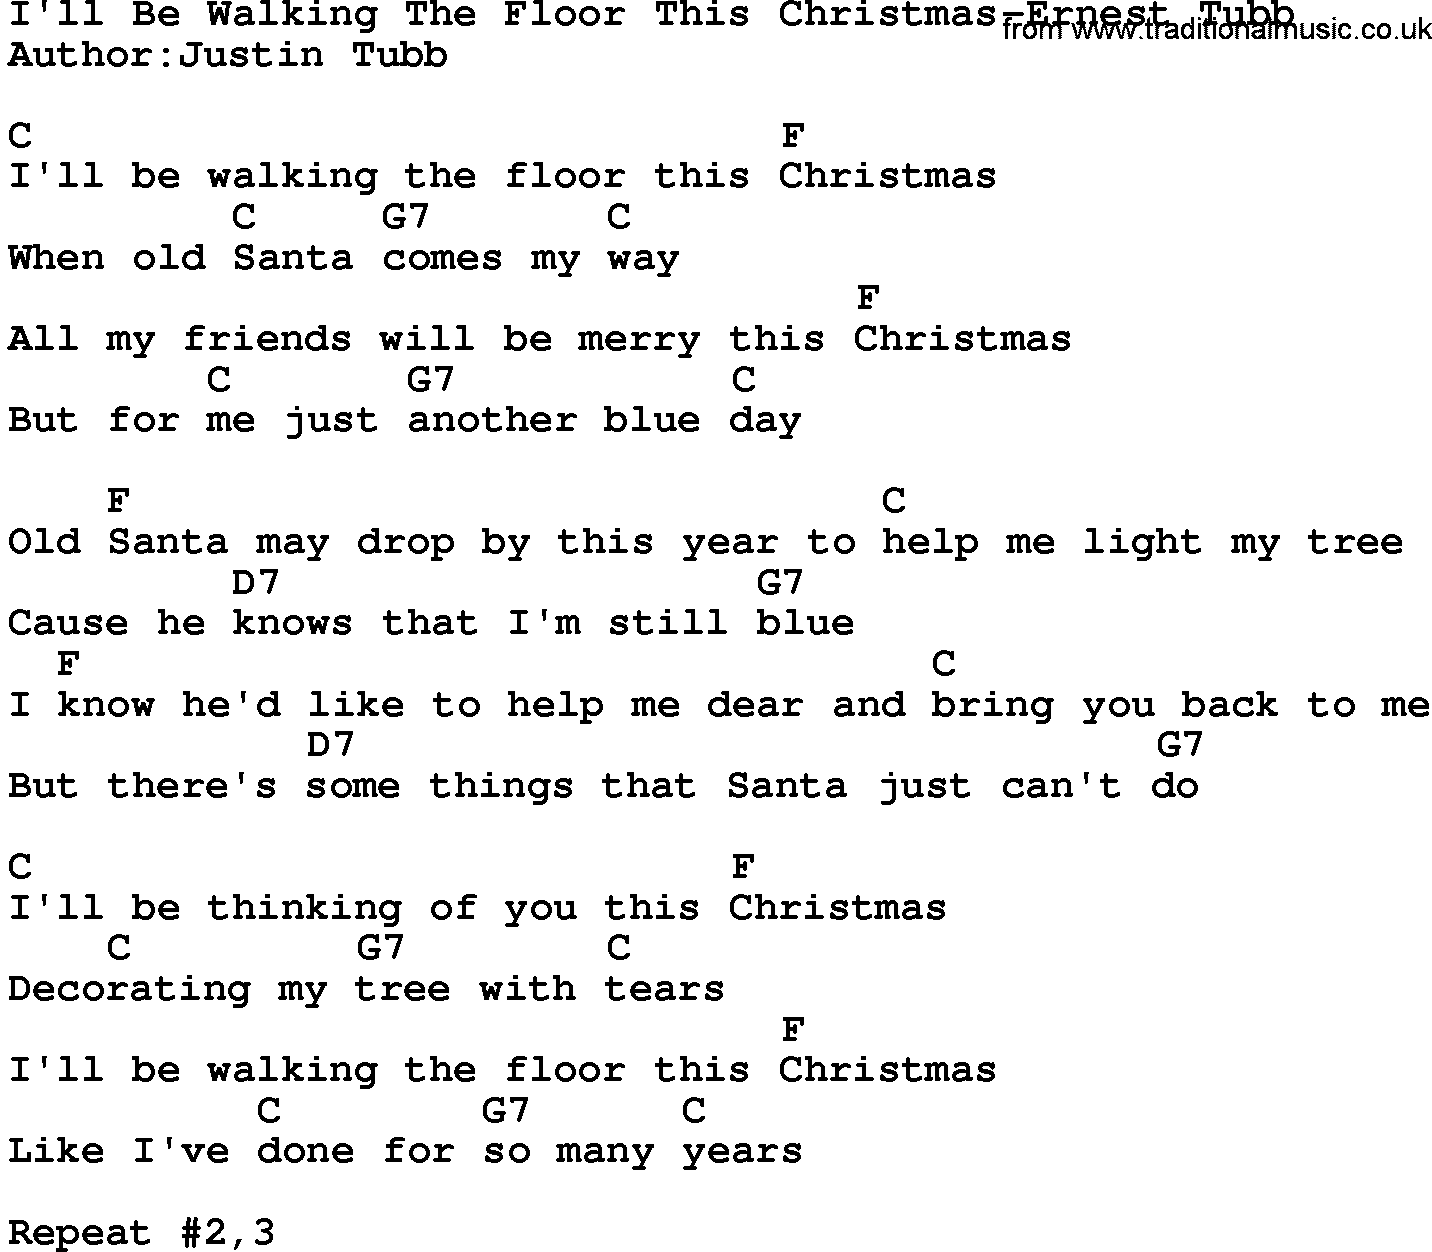 Country music song: I'll Be Walking The Floor This Christmas-Ernest Tubb lyrics and chords